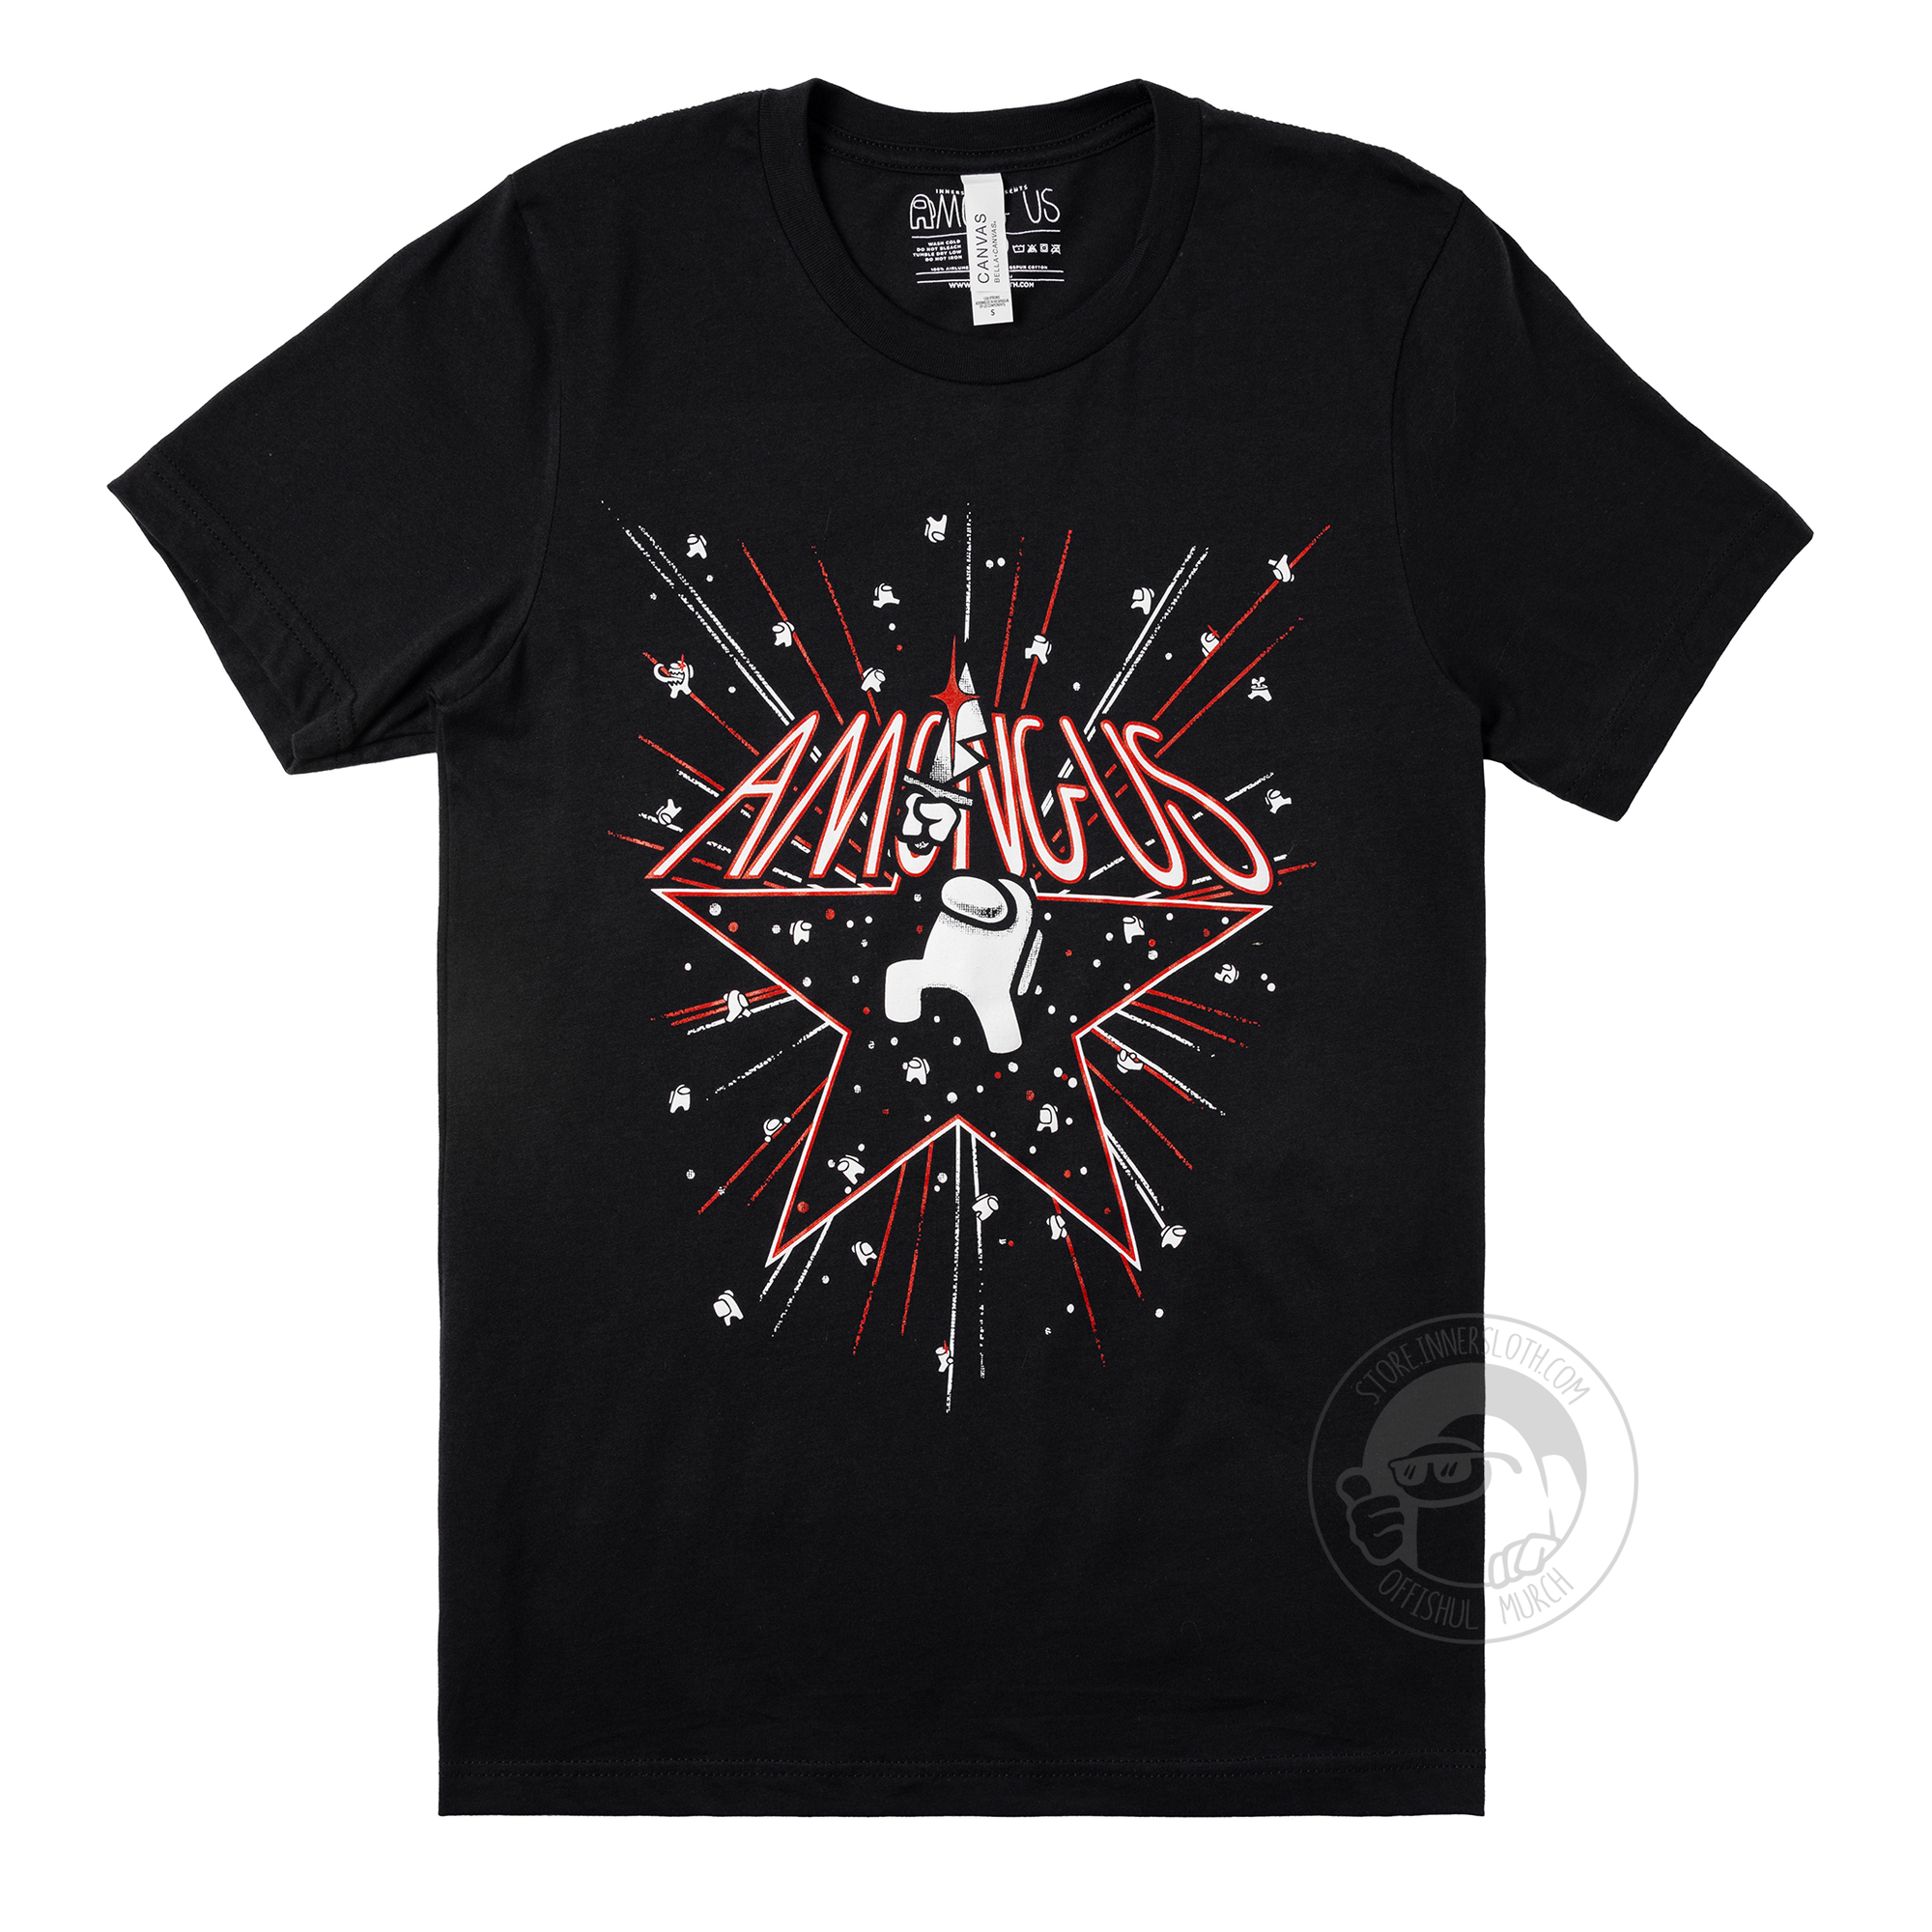 A flat lay photograph of the Among Us: 5th Anniversary Tee designed by Amy Liu on a white background. The Tee depicts a white Impostor among a flurry of stars and fireworks. The impostor stands in the middle of a red outlined star holding a bloody knife over their head. “Among Us” text is written in red and white sitting on top of the outlined star.